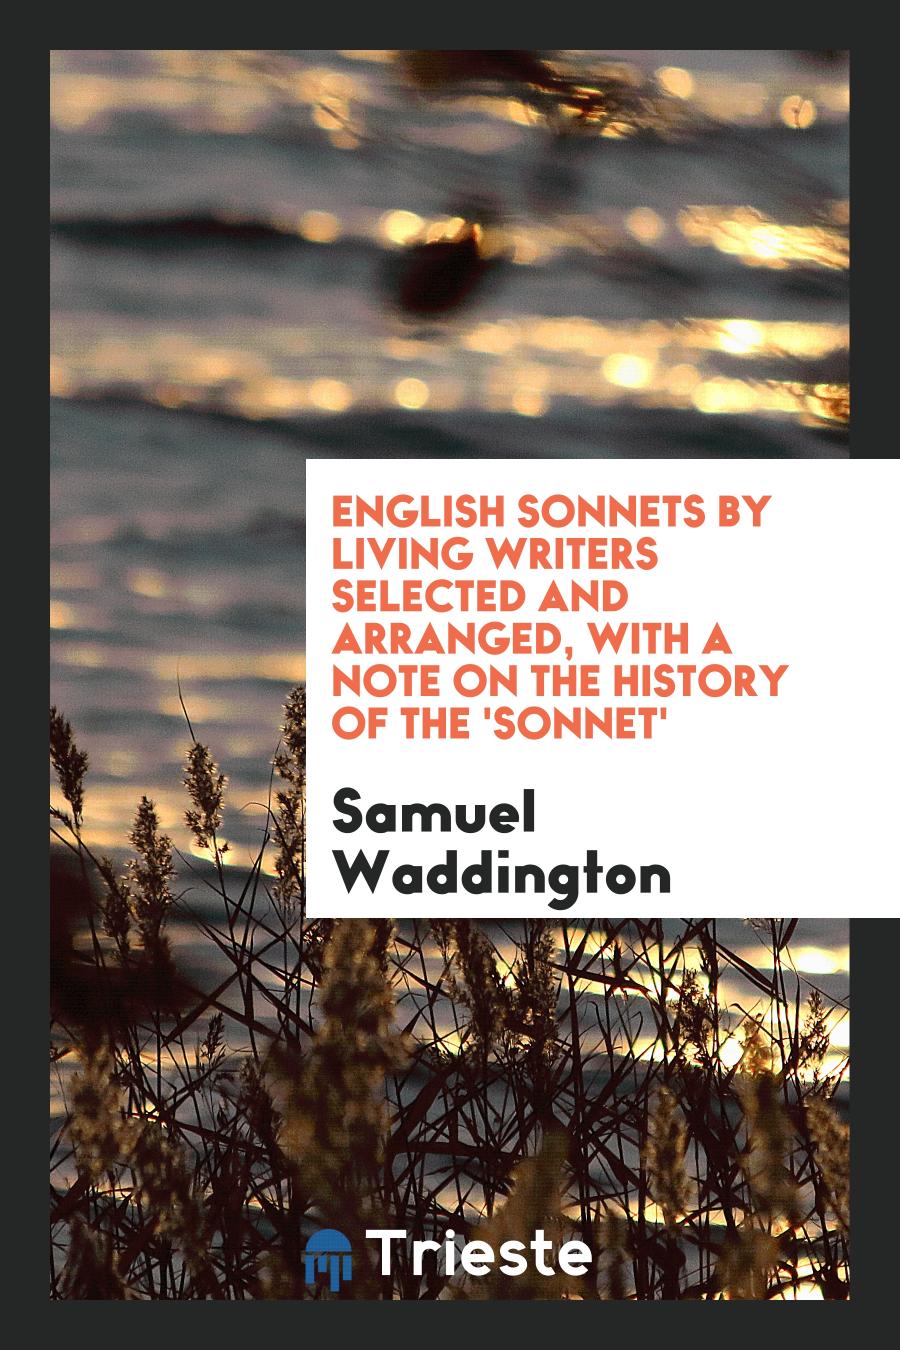 Samuel Waddington - English Sonnets by Living Writers Selected and Arranged, with a Note on the History of the 'Sonnet'